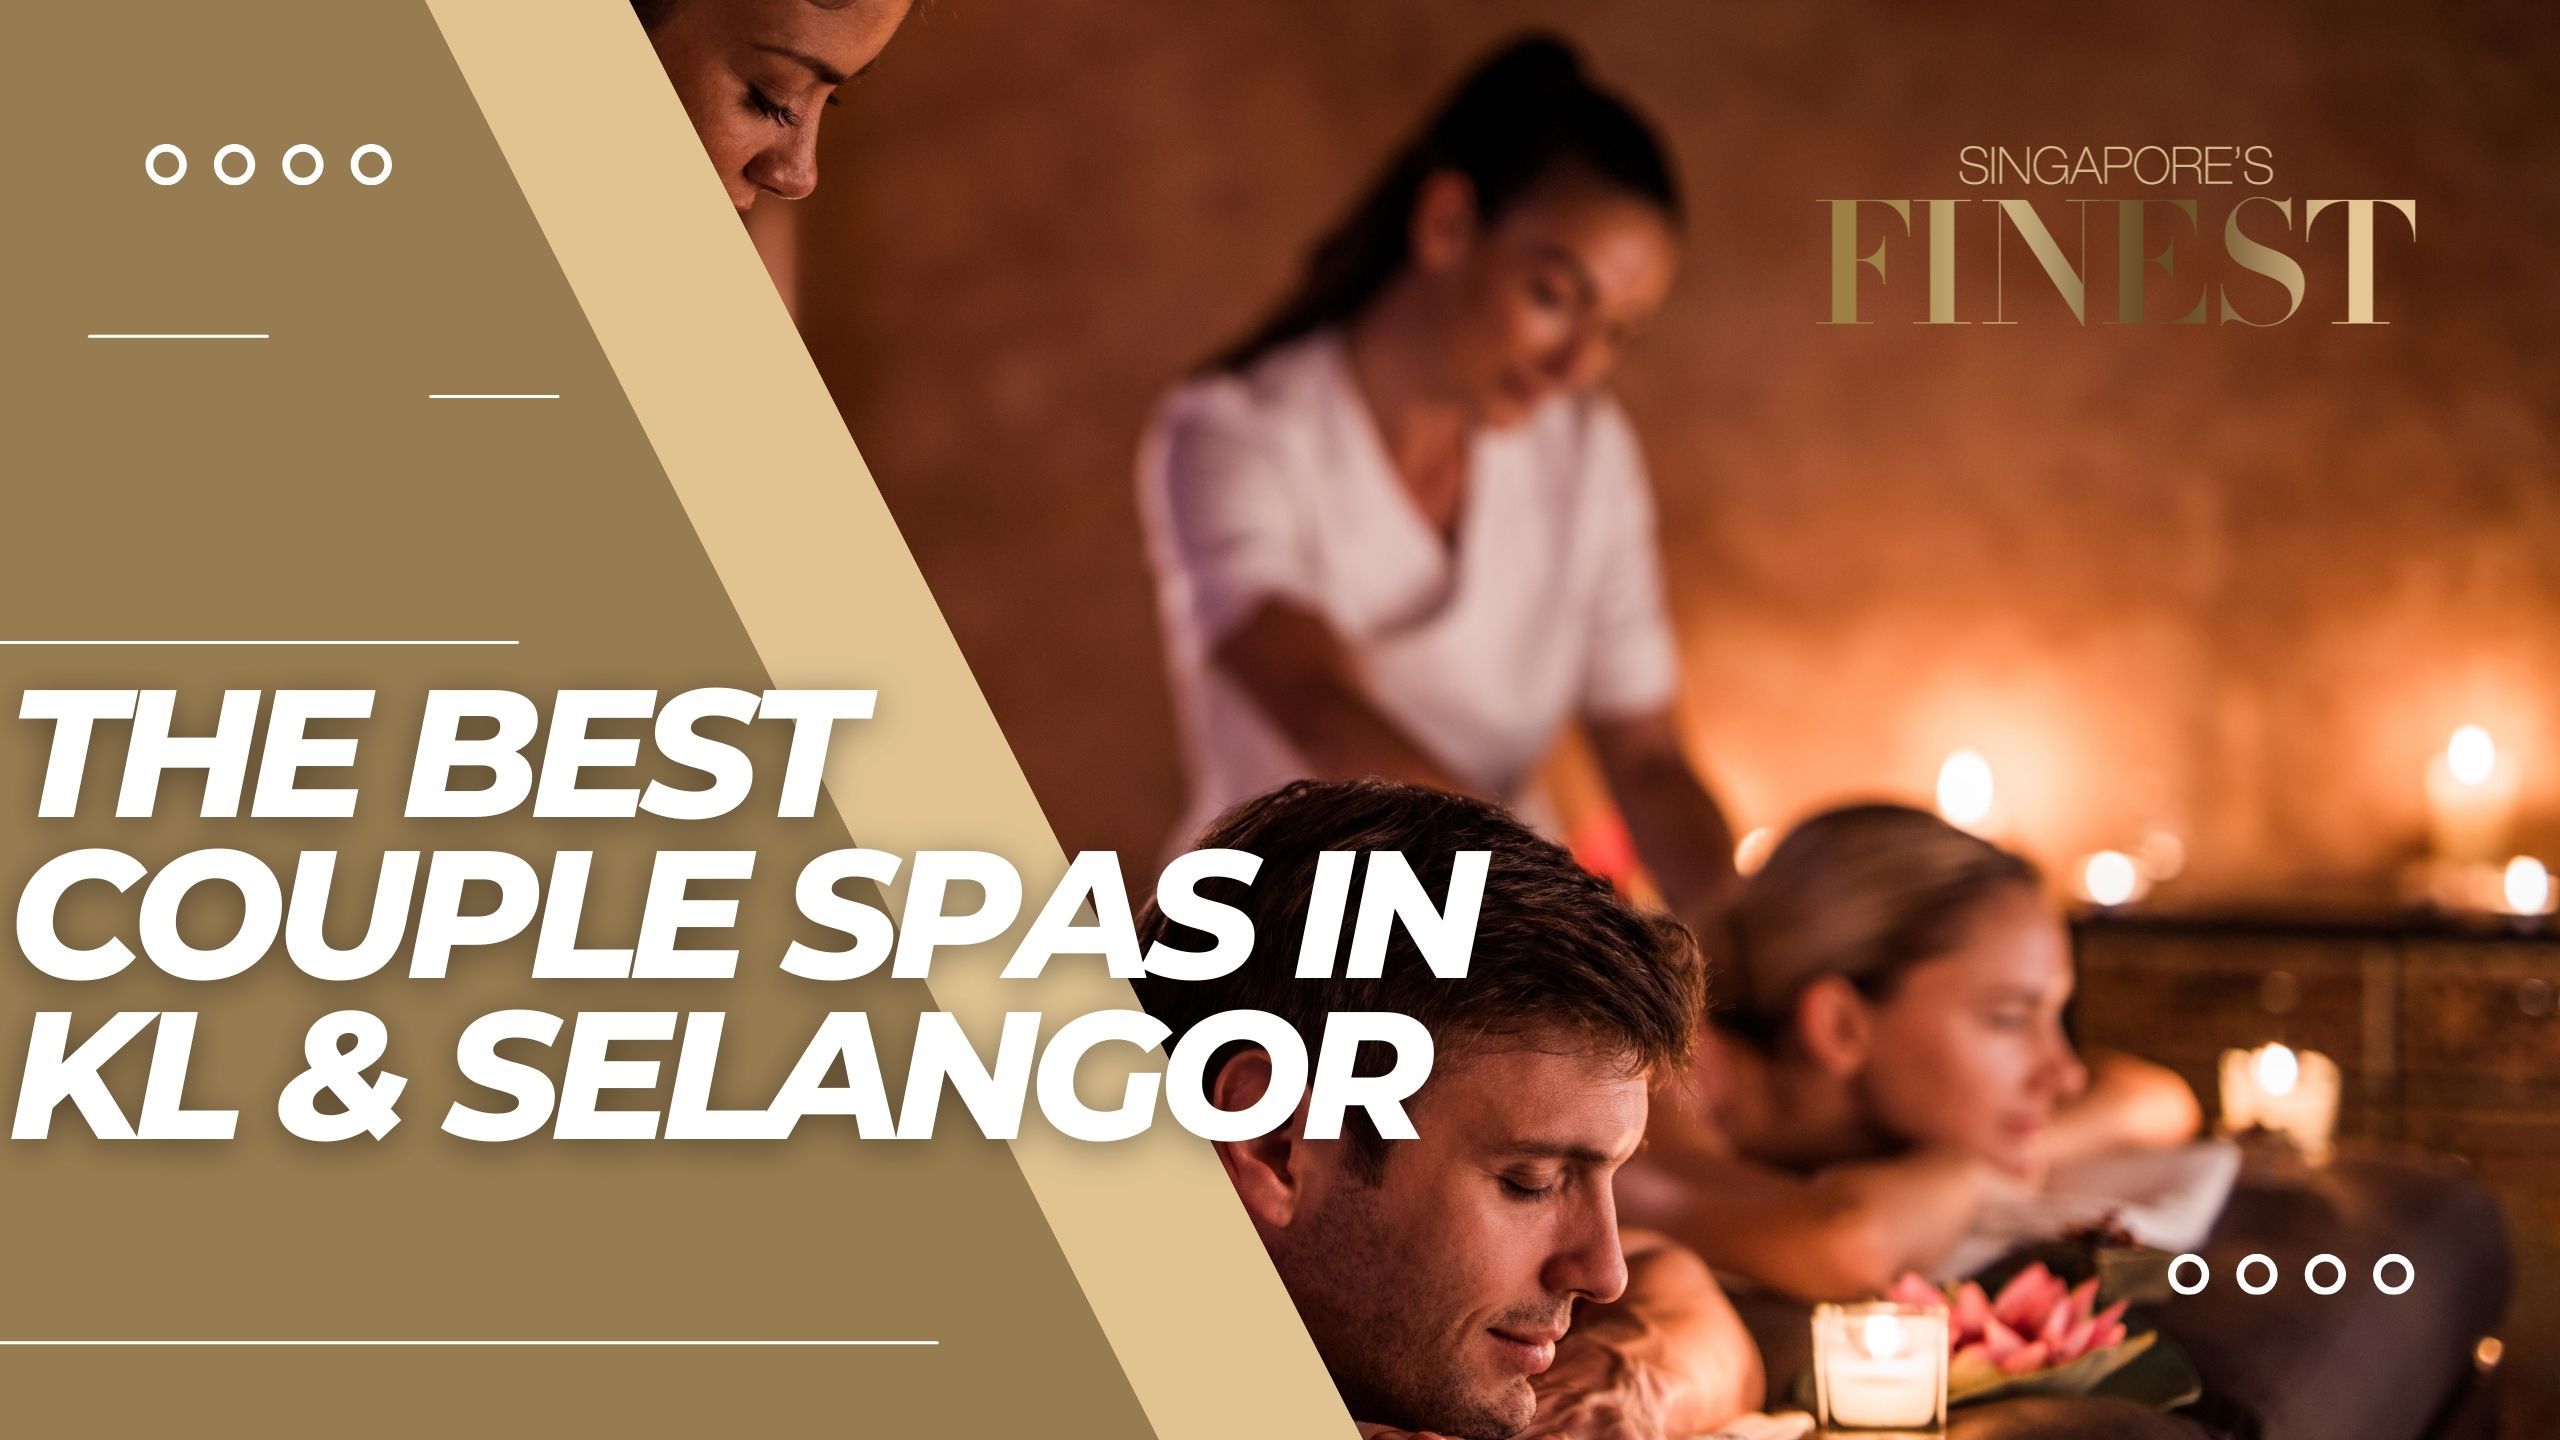 The Finest Couple Spas in KL and Selangor